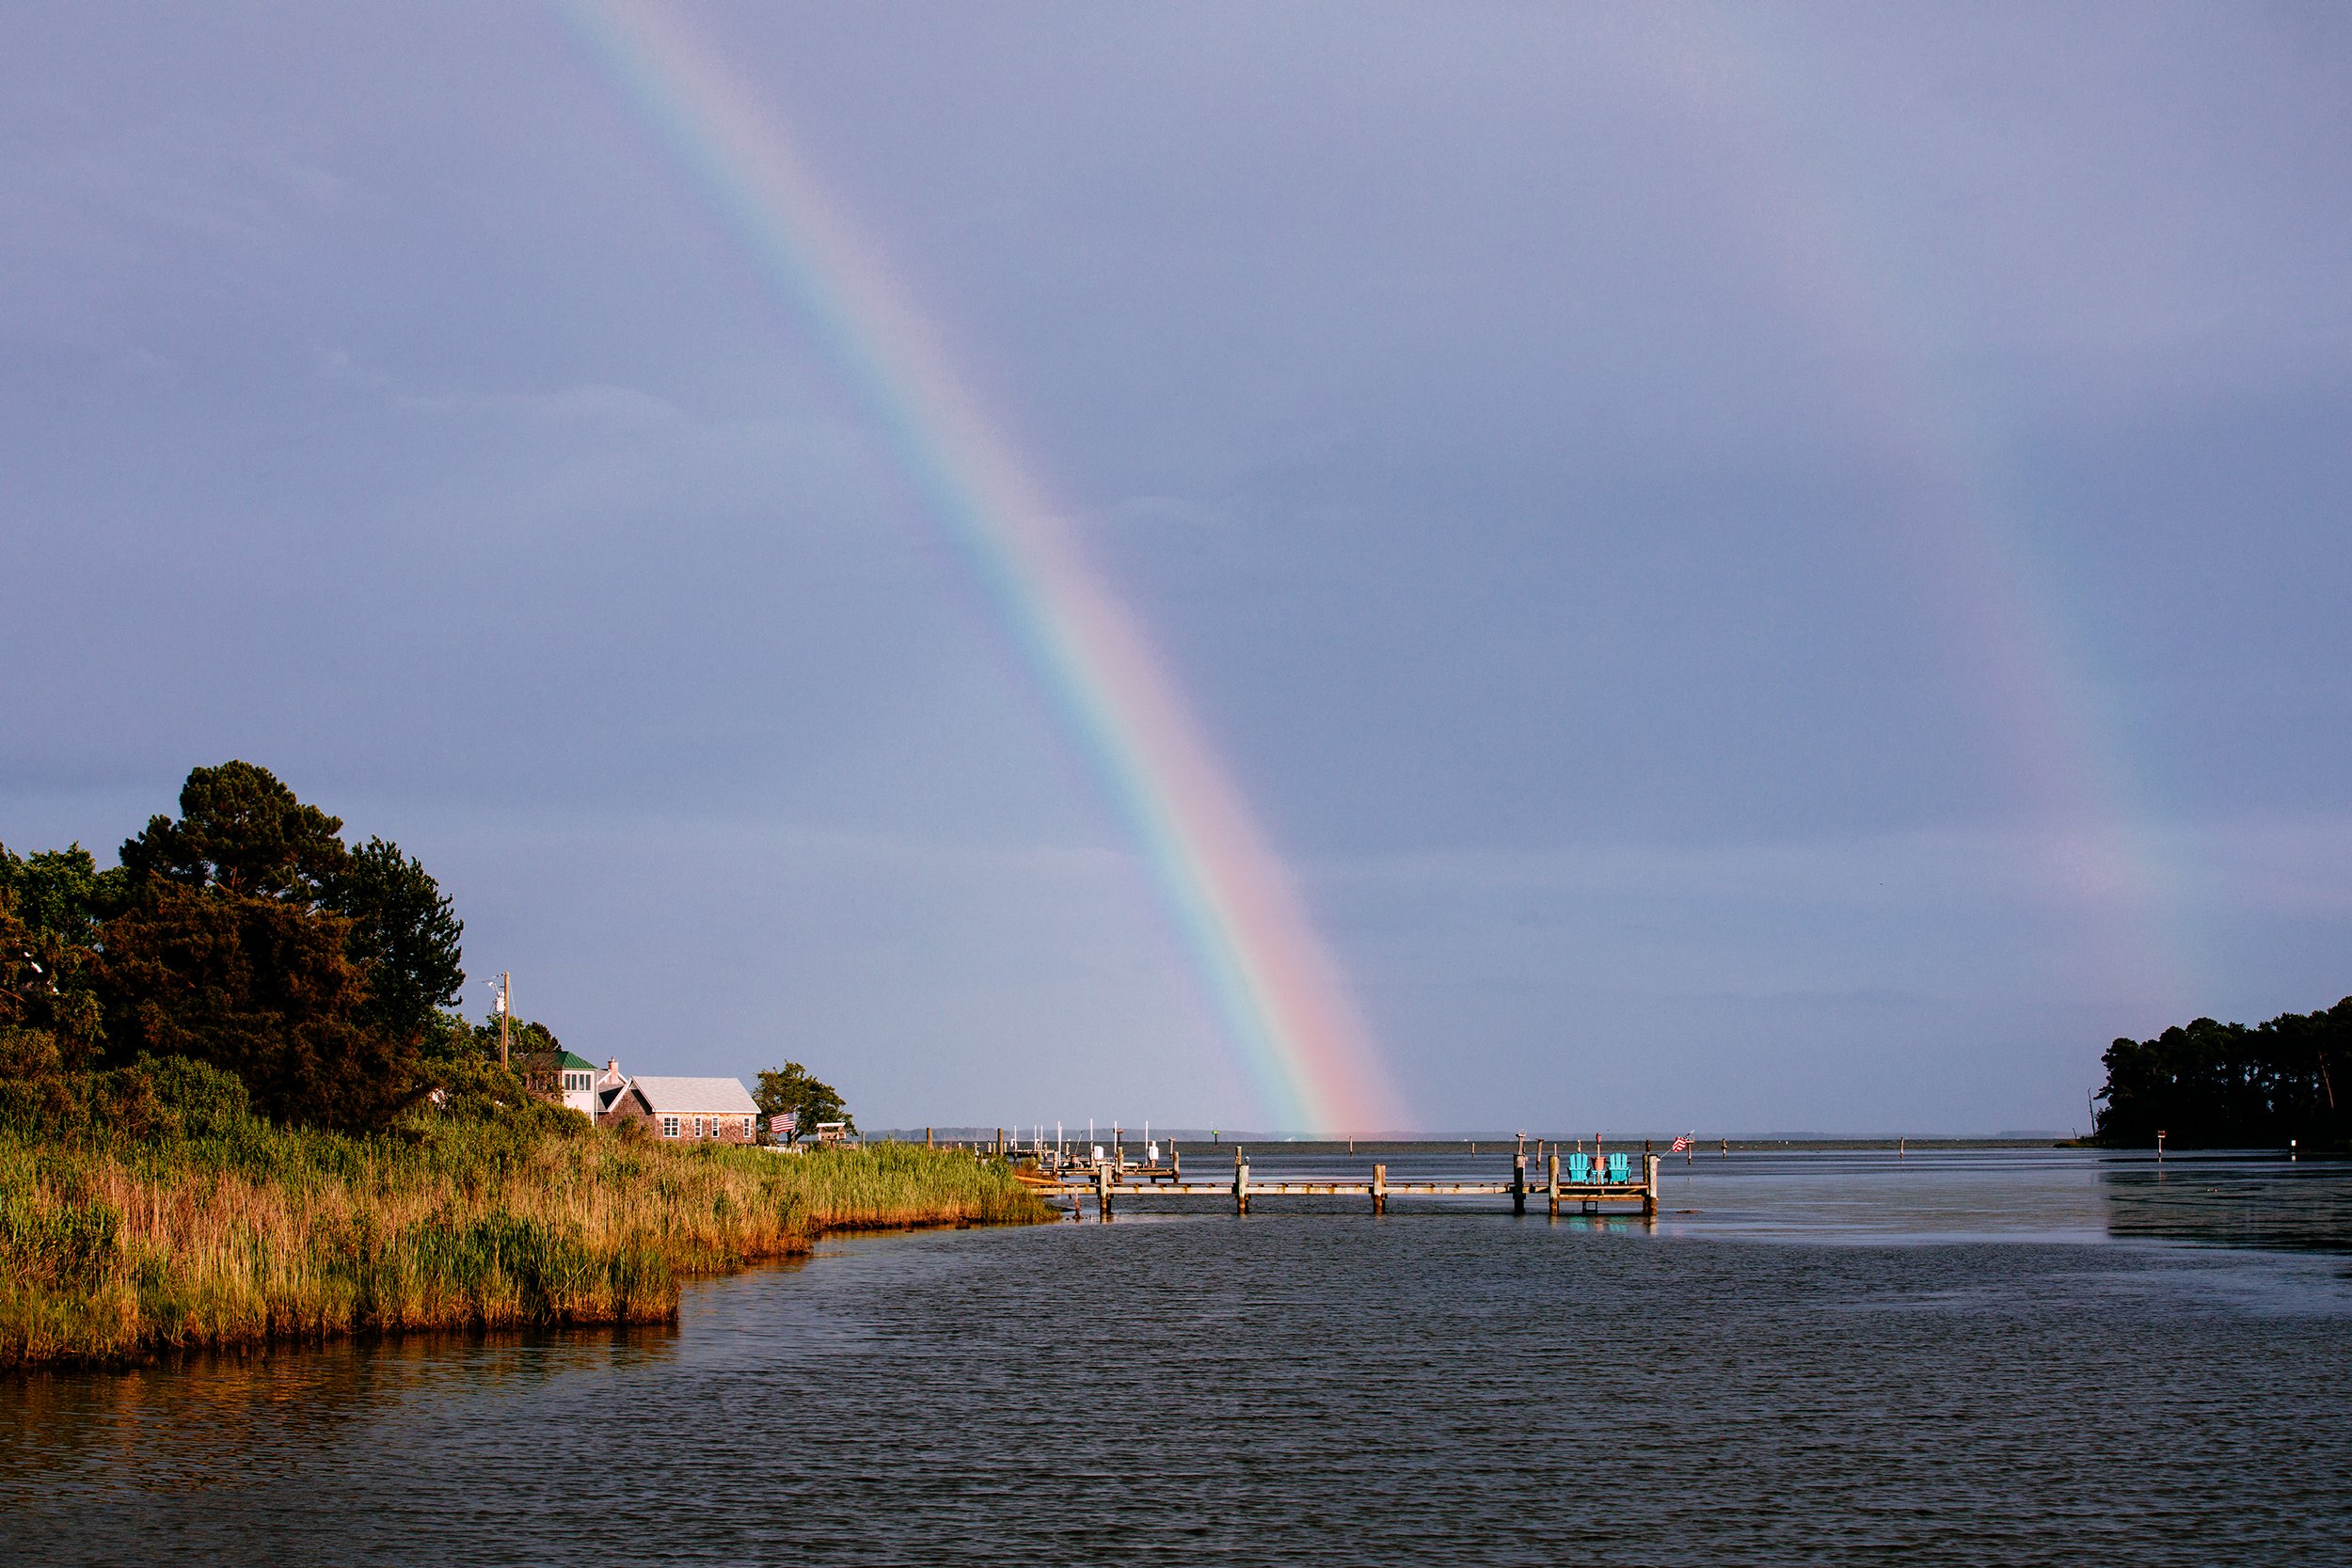  A double rainbow appears after a cloudburst passed over Tilghman Island. Areas like Tilghman Island are still home to smaller traditional waterman communities, but have also been subject to gentrification and an increase in summer homes. 